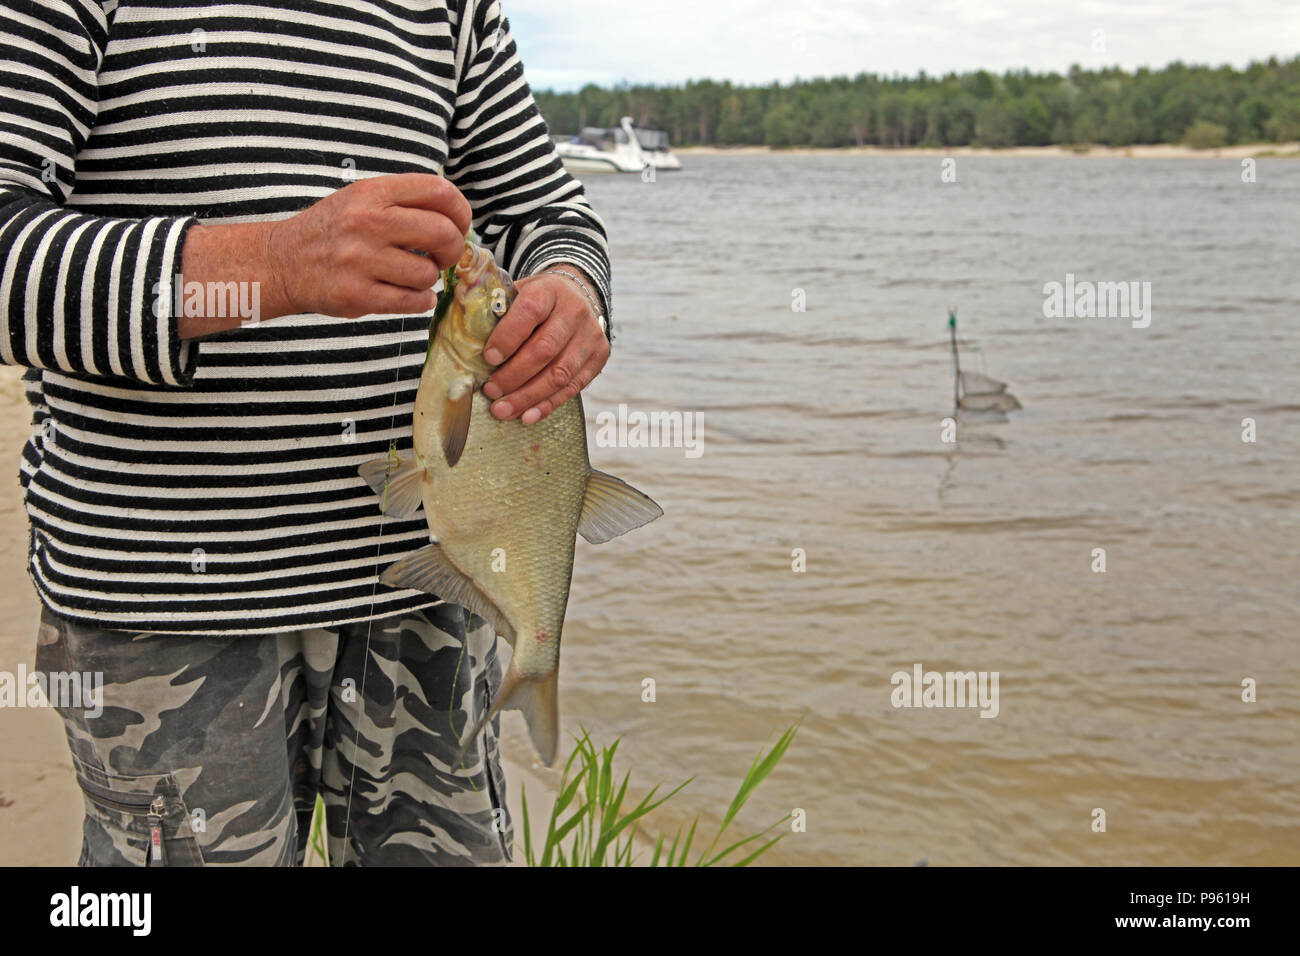 A common bream, freshwater bream, bronze bream, or carp bream in fisherman's hand after fishing, with sea and forest on background Stock Photo